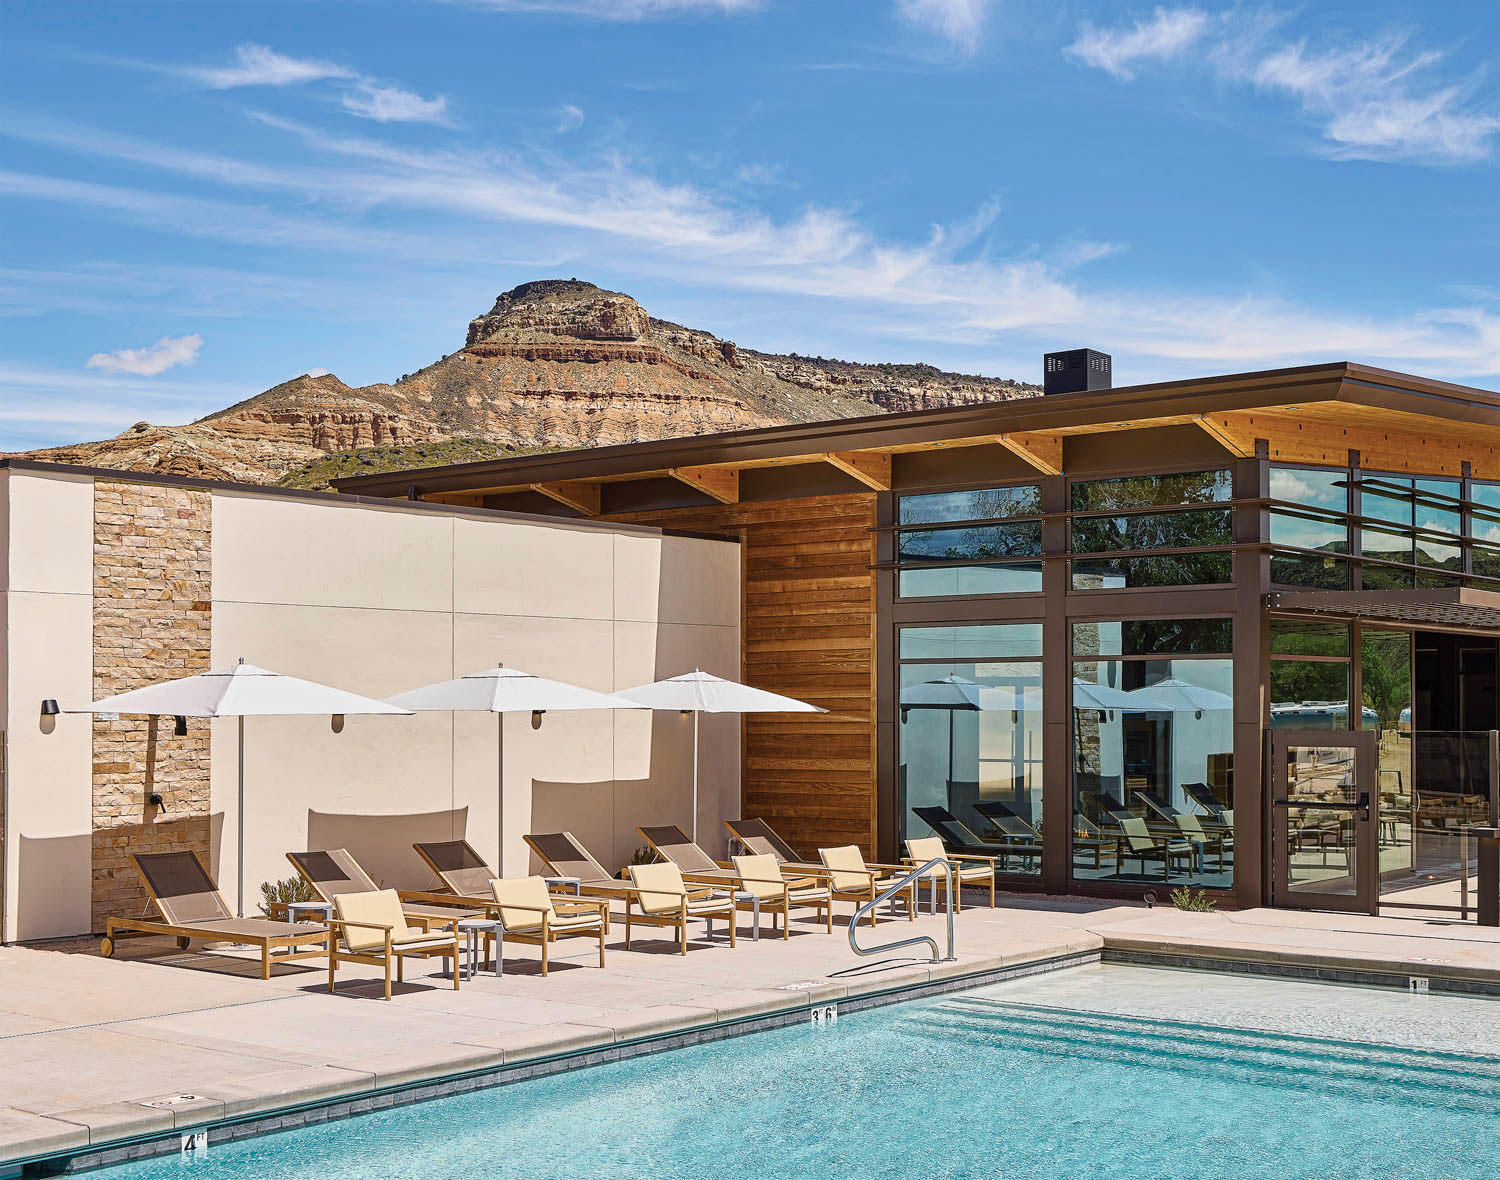 the outdoor pool at the communal clubhouse of AutoCamp Zion